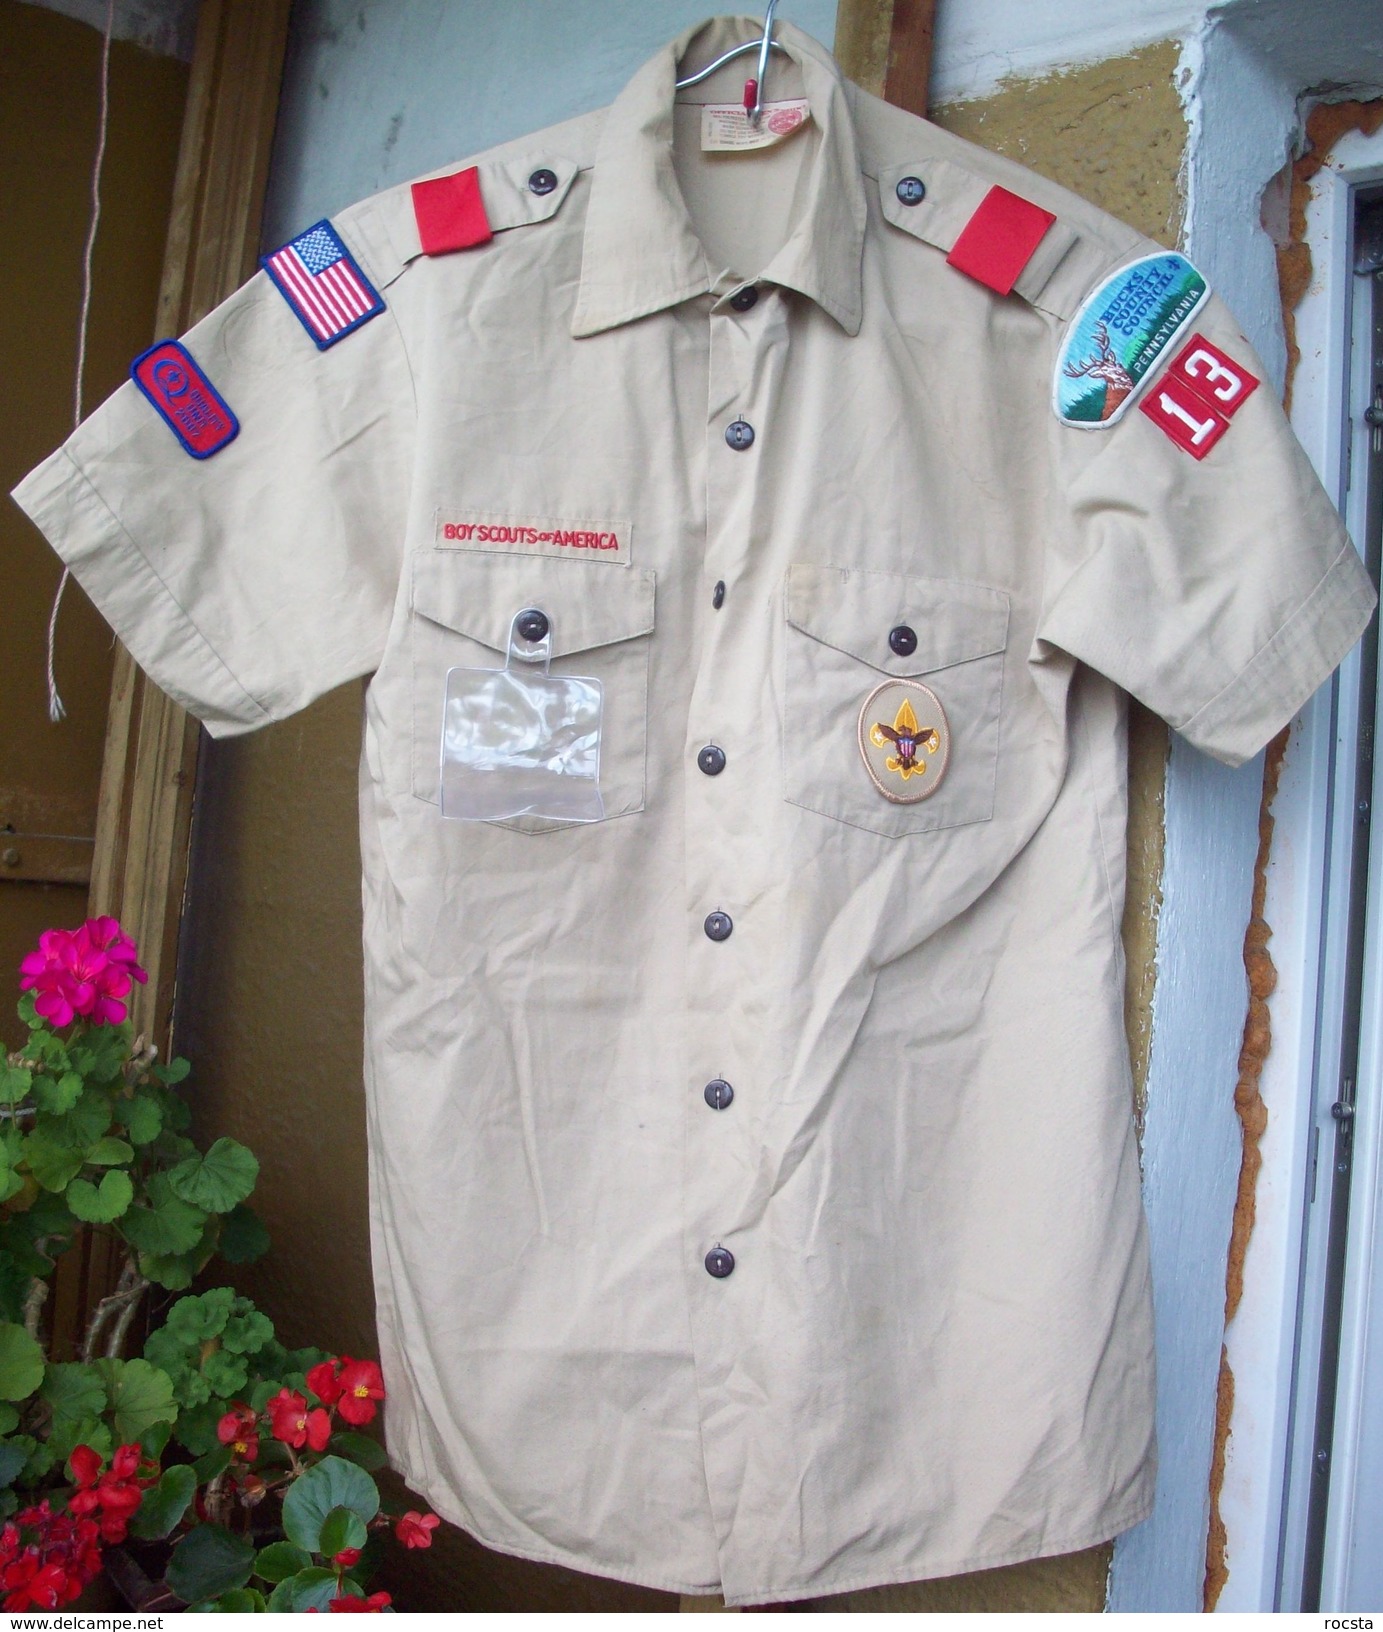 BSA US Scout Shirt - 9 Patches & Ranks - Scouting